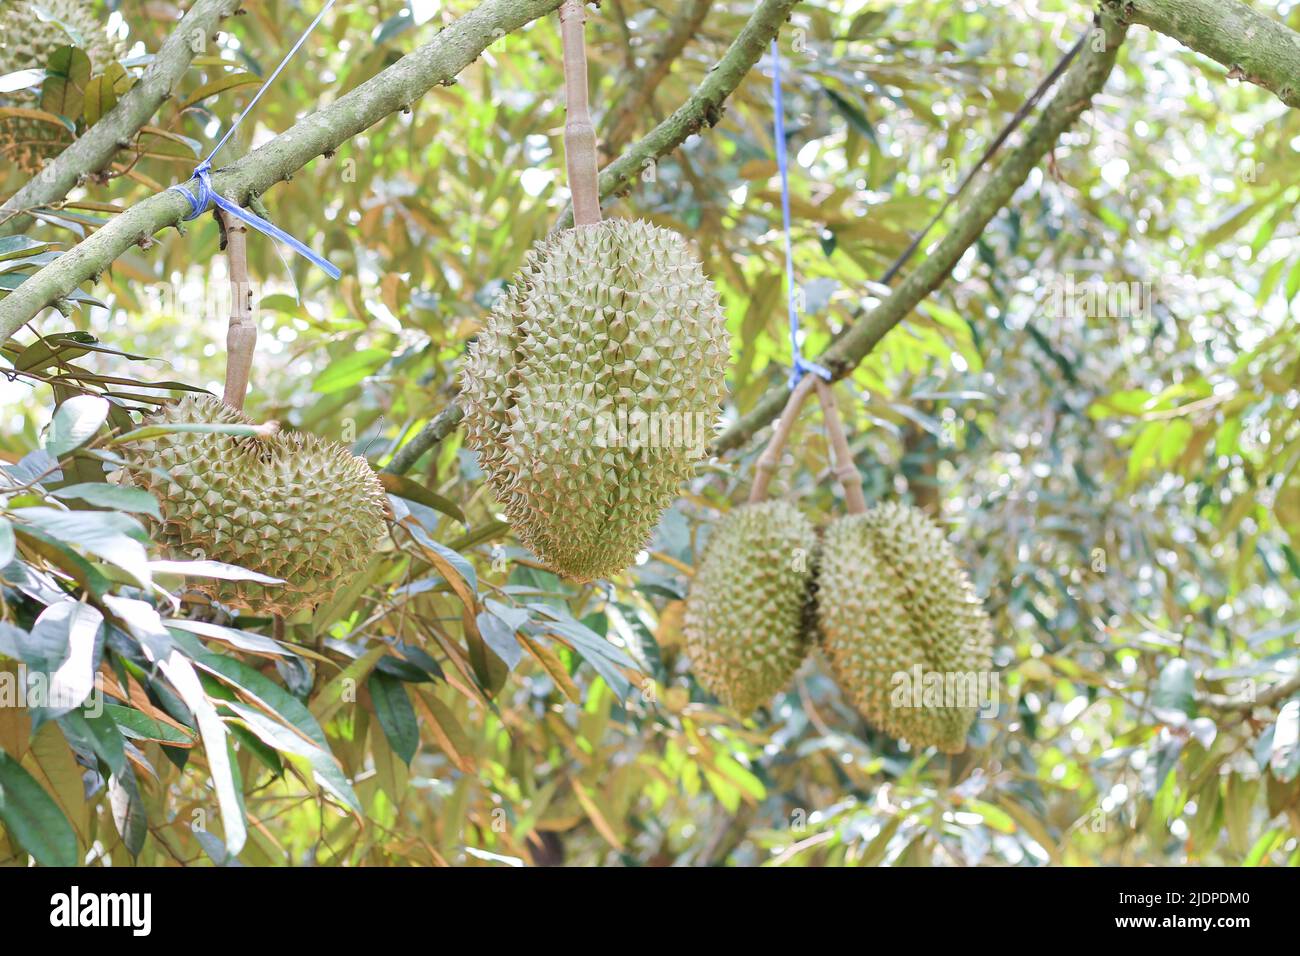 Durian from Sisaket,Thailand has a unique flavor because it is grown on soil rich in potassium from a volcanic eruption. "Volcano Durian" Stock Photo